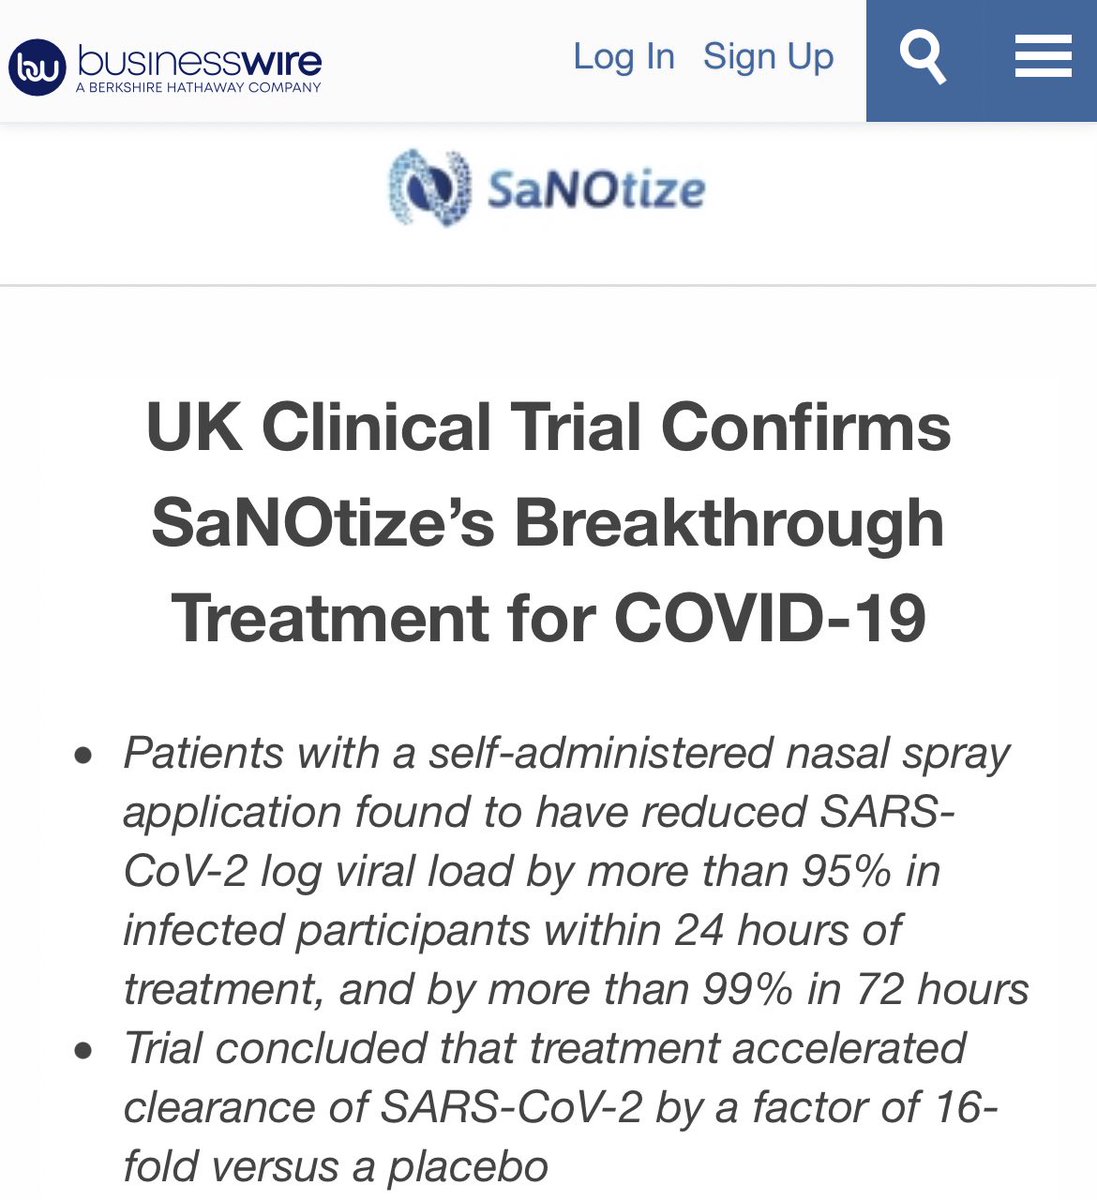 [QQT: COVID KILLER FOUND?]1/21Just received this as a forward. Breakthrough treatment for COVID-19, it announces. Very upbeat, very positive. Not sure if our media has picked up on it yet. If not, very sure they will. Soon.